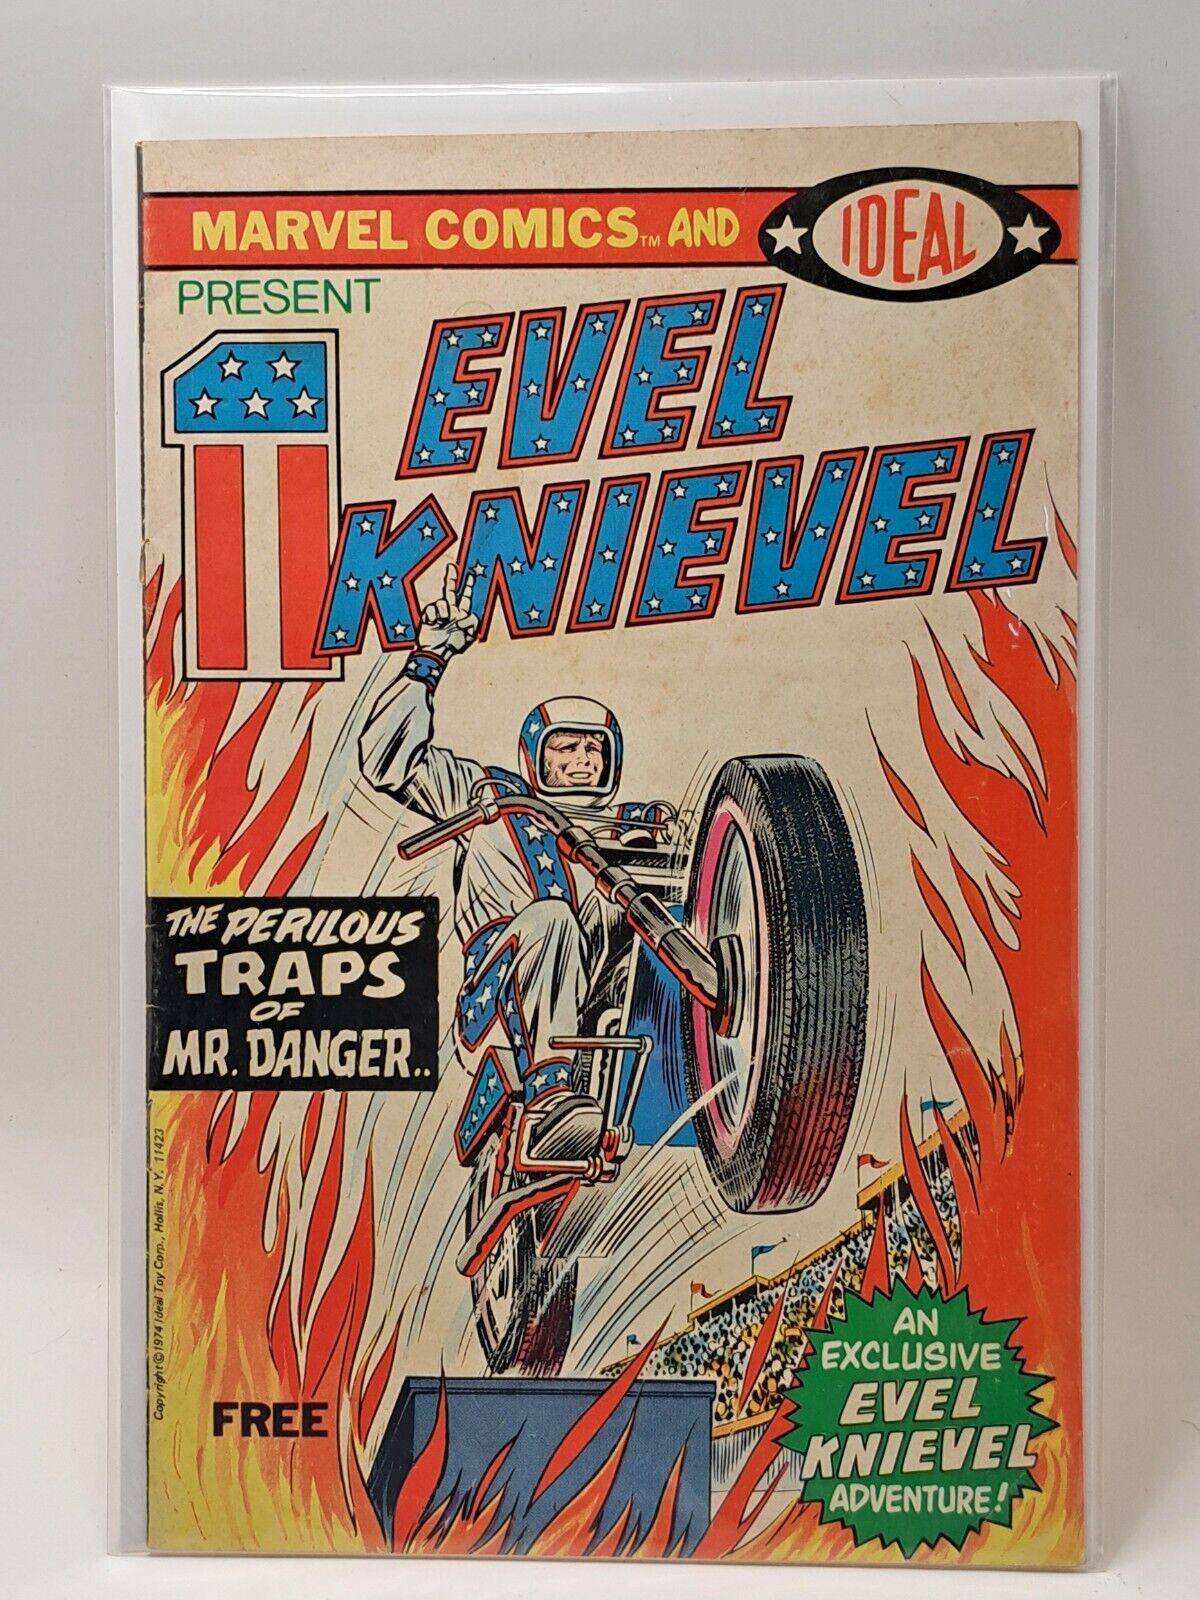 EVEL KNIEVEL #1 FN VF Free Giveaway Promo Comic MARVEL IDEAL VF